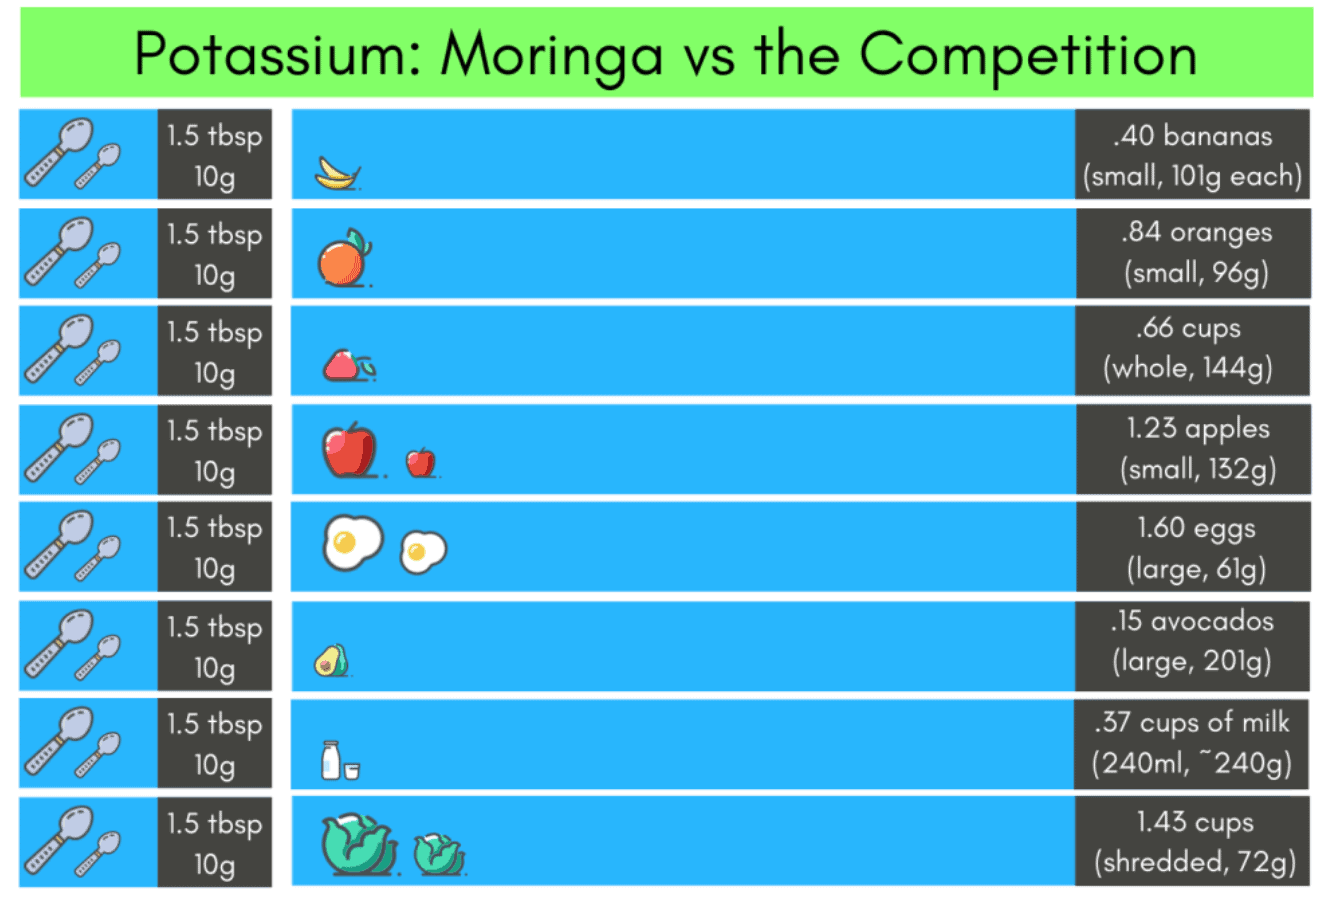 An image of Moringa vs the competition in potassium